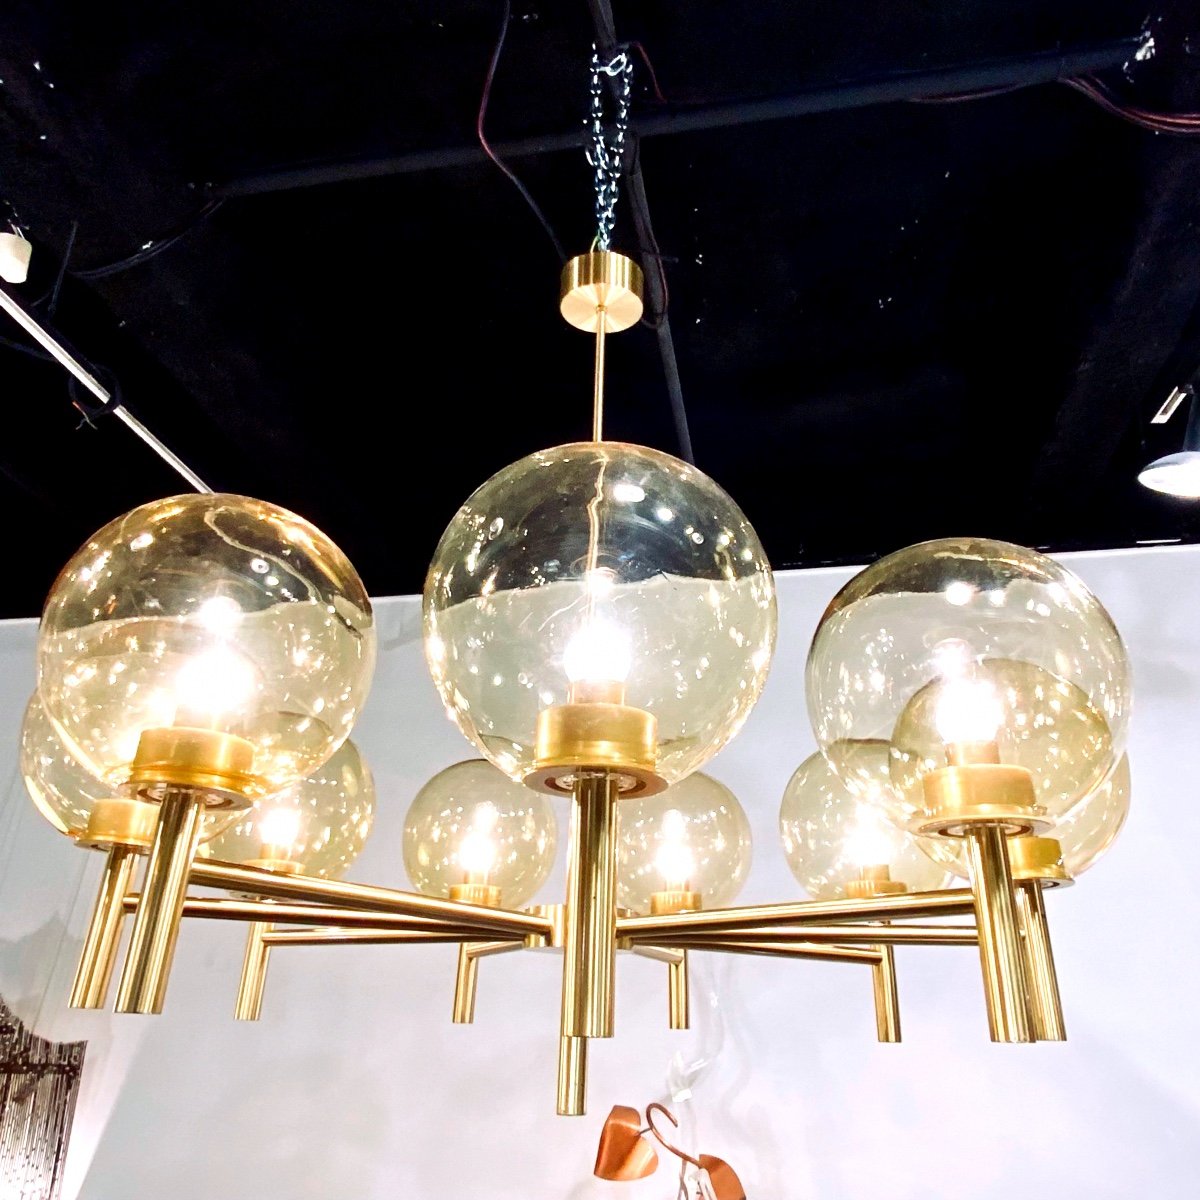 Large Luxus Chandelier With 9 Lights In Golden Brass And Amber Glass Globes, Sweden 1970s/80s-photo-3